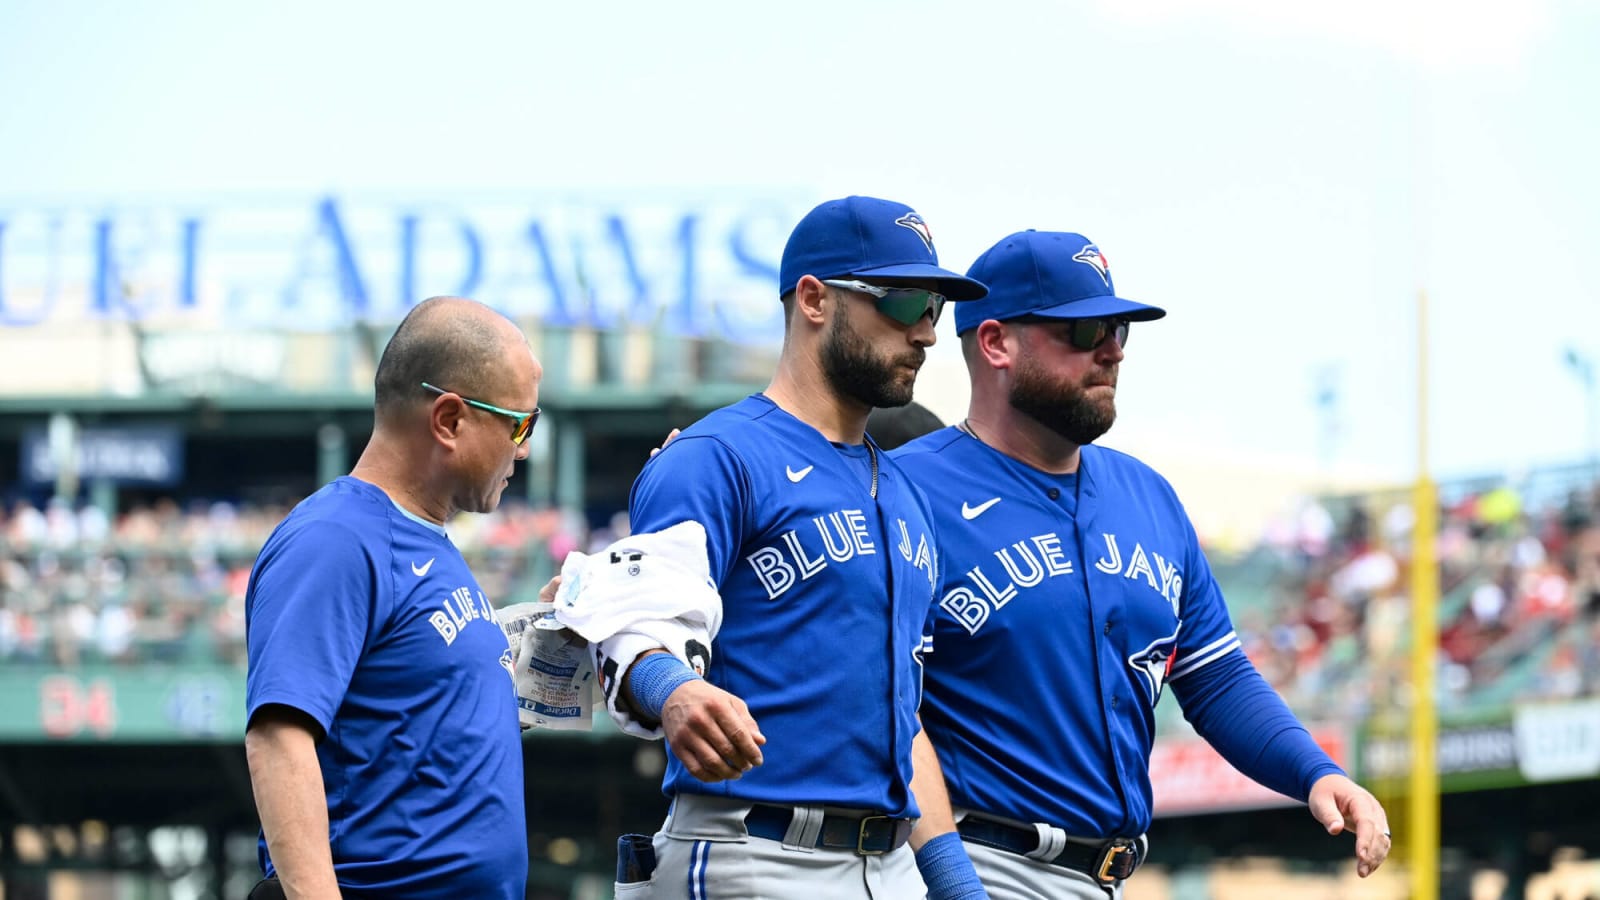 Toronto Blue Jays outfielder Kevin Kiermaier receives stiches after crashing into Fenway Park fence